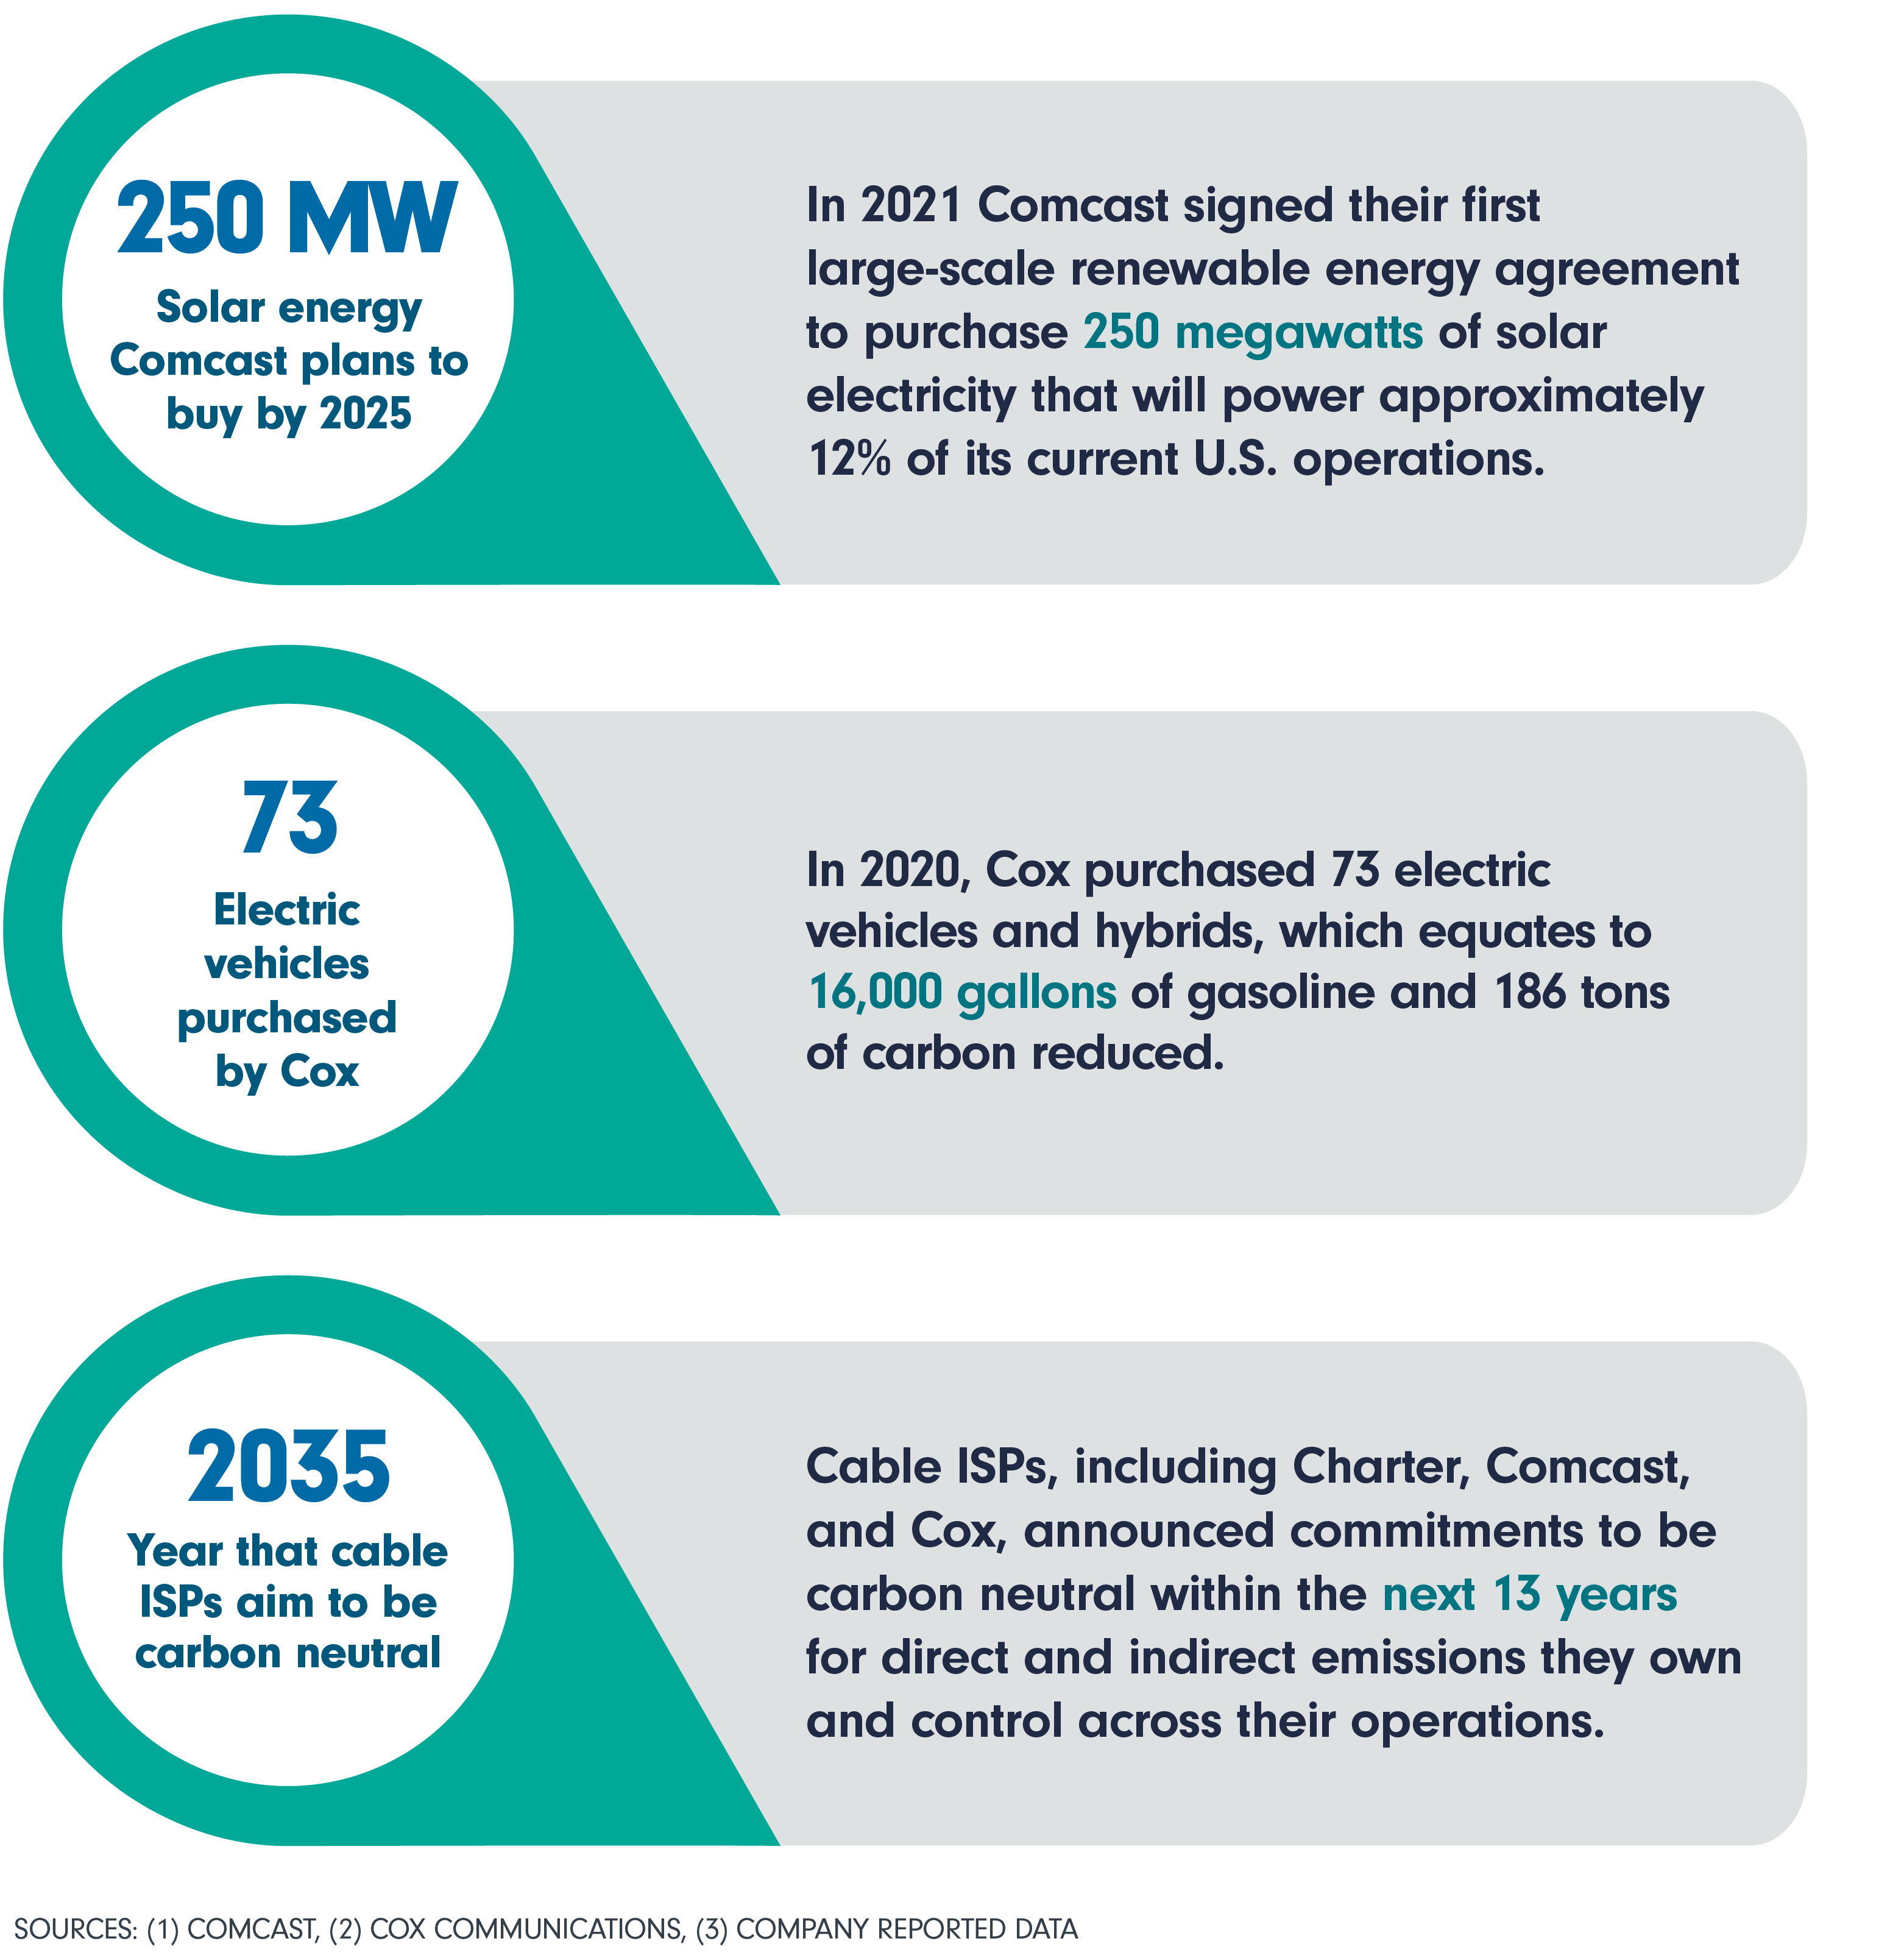 250 MW Solar energy Comcast plans to buy by 2025; 73  Electric vehicles purchased by Cox; 2035 Year that cable ISPs aim to be carbon neutral